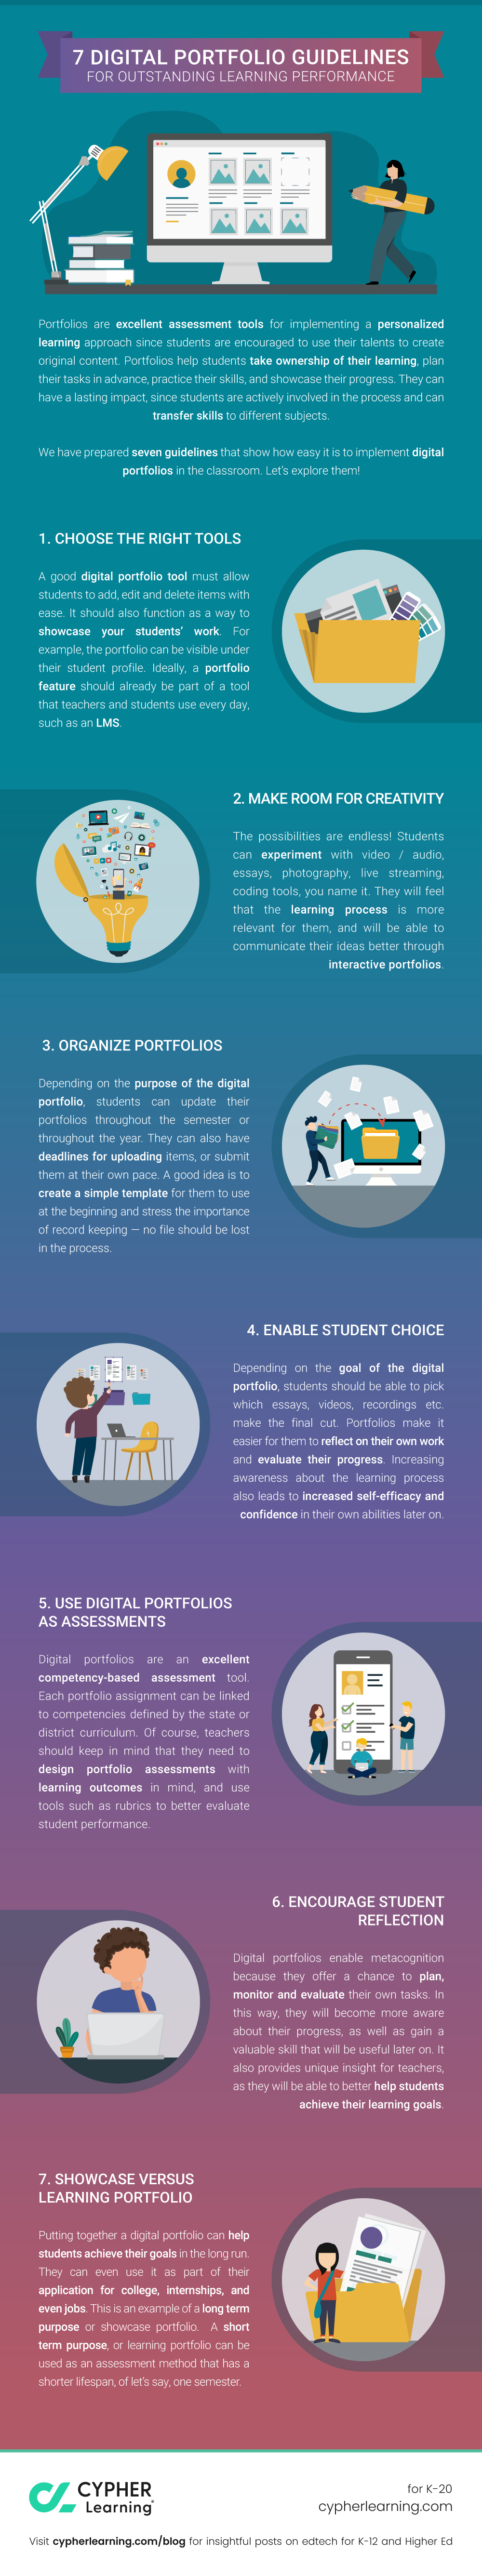 7 Digital portfolio guidelines for outstanding learning performance